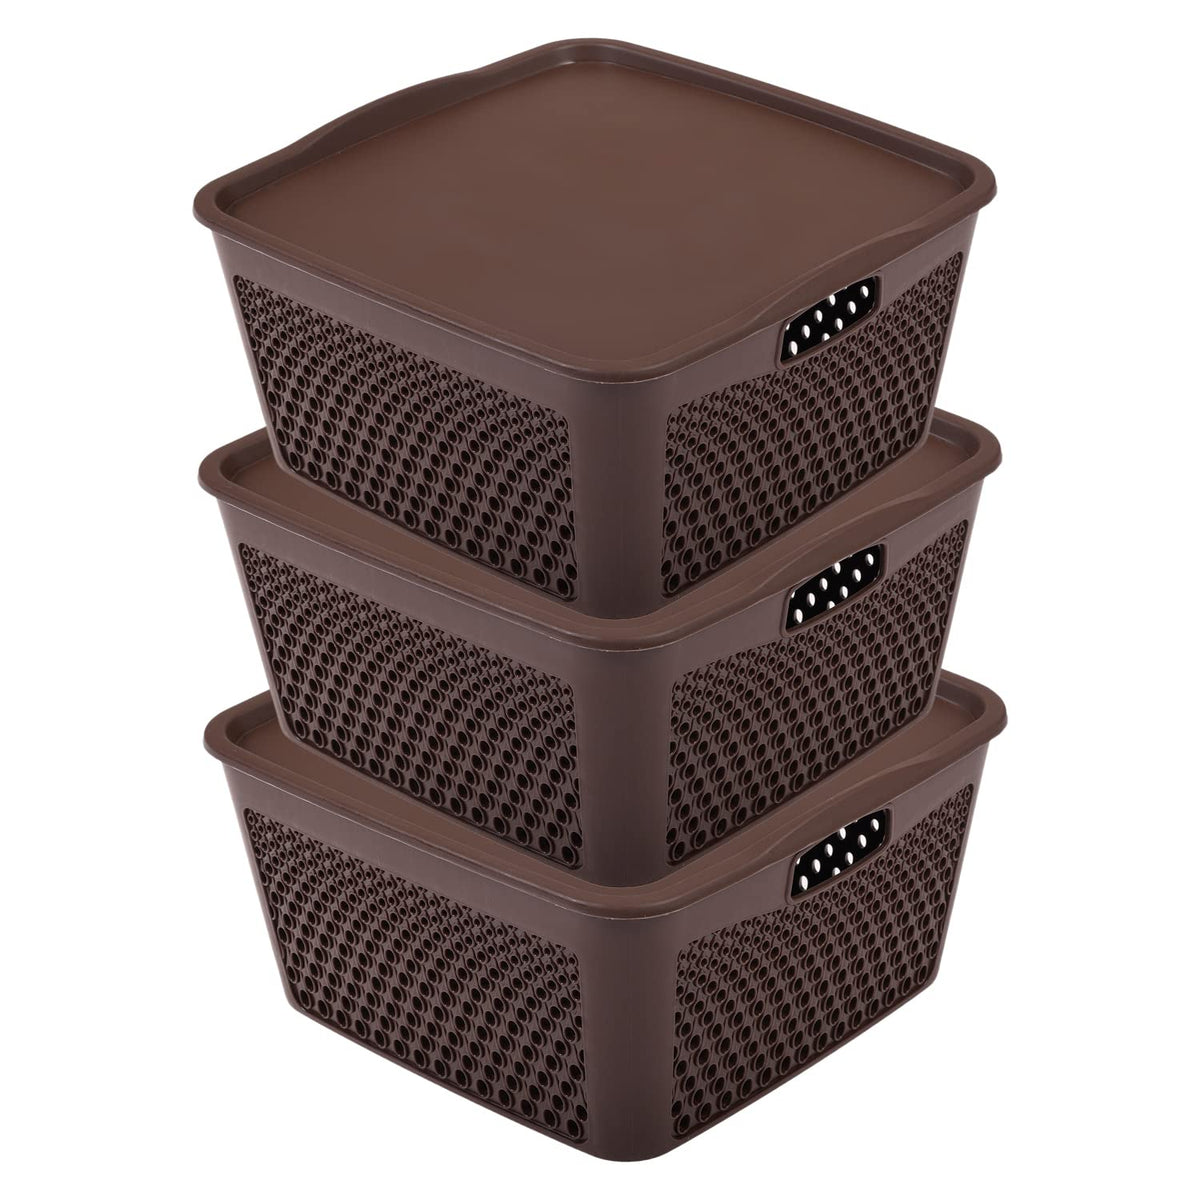 Kuber Industries Netted Design Unbreakable Multipurpose Square Shape Plastic Storage Baskets with lid Medium Pack of 3 (Brown)